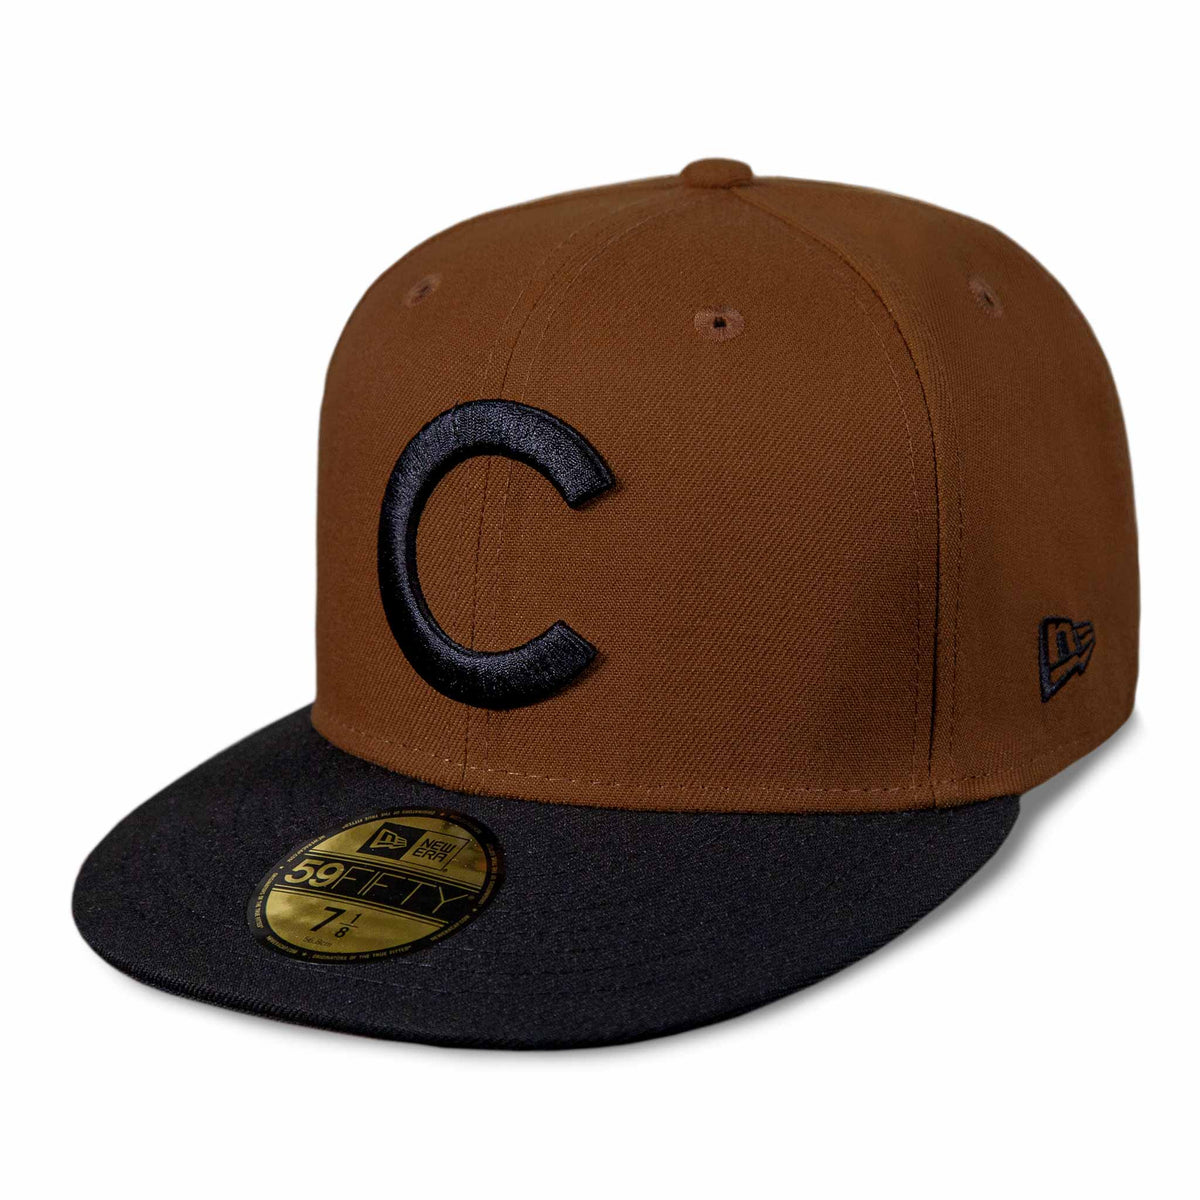 Chicago Cubs 1969 Walnut Panama Tan 59FIFTY Fitted Cap 7 1/2 = 23 1/2 in = 59.7 cm